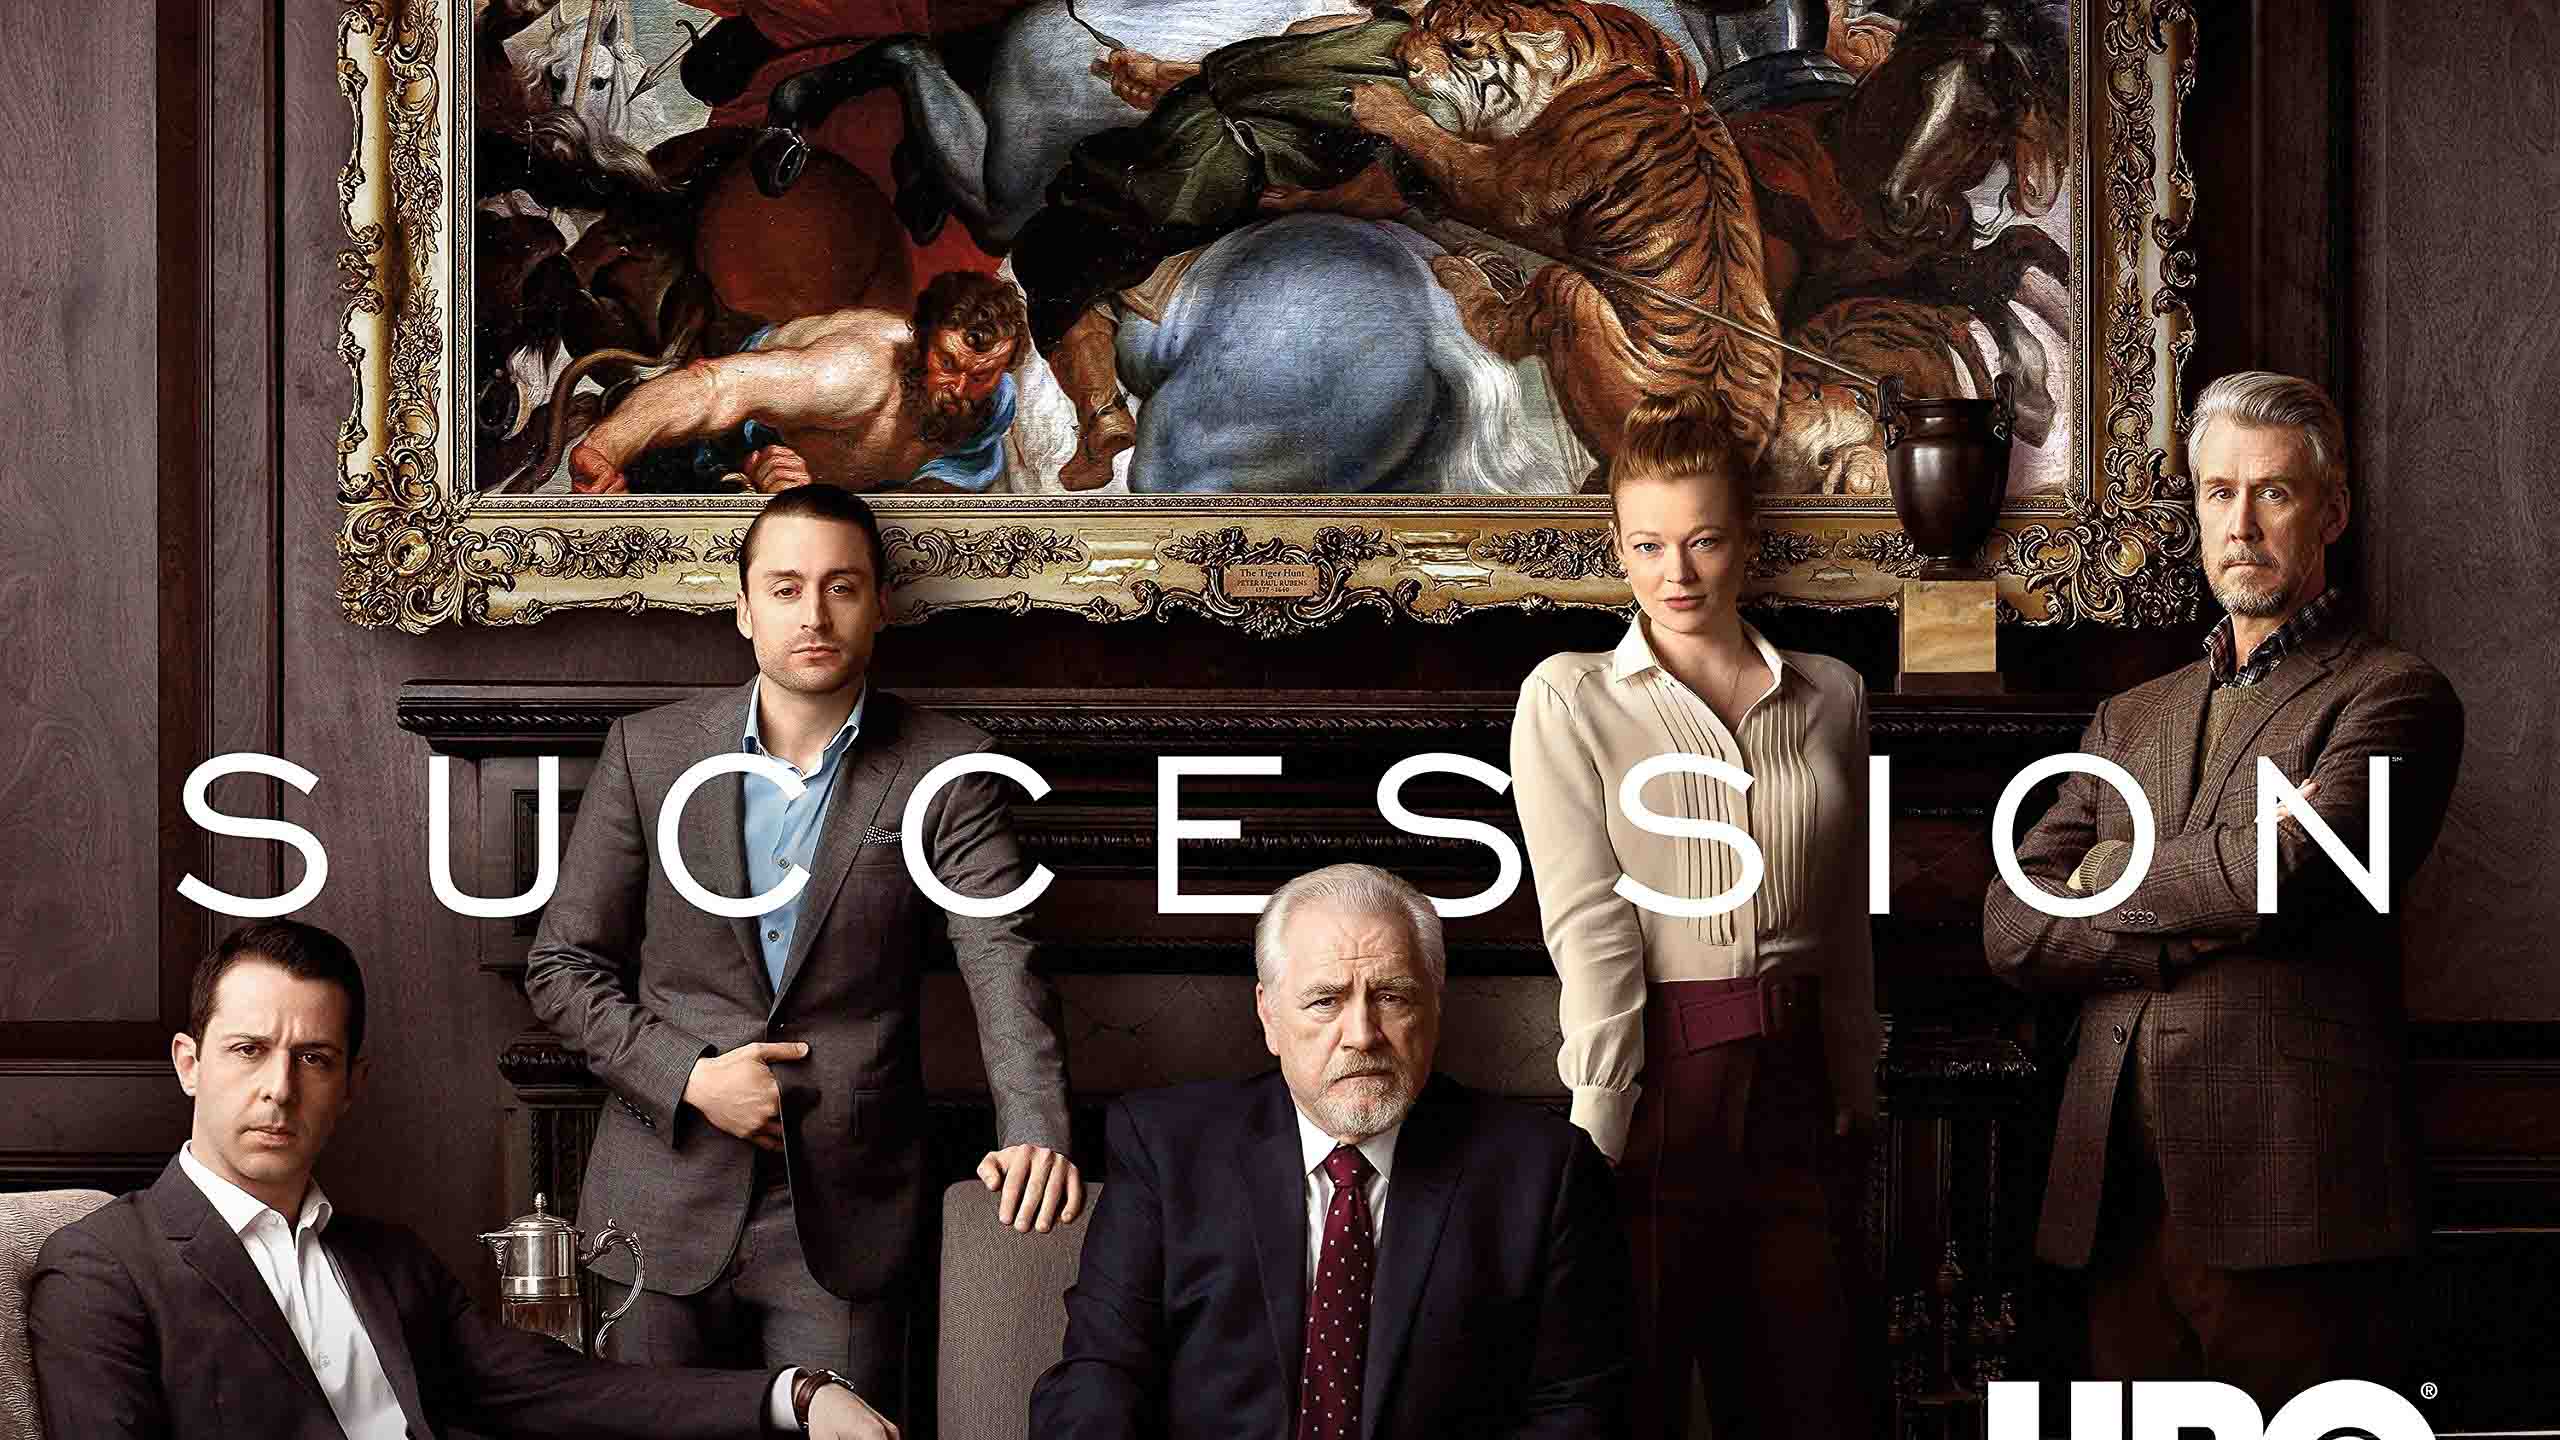 Succession is an American drama television series, created by Jesse Armstrong, that premiered on June 3, 2018, on HBO. The series centers on the fictional Roy family, the dysfunctional owners of a global media empire who are fighting for control of the company amidst uncertainty about the health of the family's patriarch, Logan Roy. The series stars an ensemble cast featuring Hiam Abbass, Nicholas Braun, Brian Cox, Kieran Culkin, Peter Friedman, Natalie Gold, Matthew Macfadyen, Alan Ruck, Parker Sawyers, Sarah Snook, Jeremy Strong, and Rob Yang. The first season received generally favorable reviews from critics. In June 2018, it was announced that the series had been renewed for a second season.Wikipedia